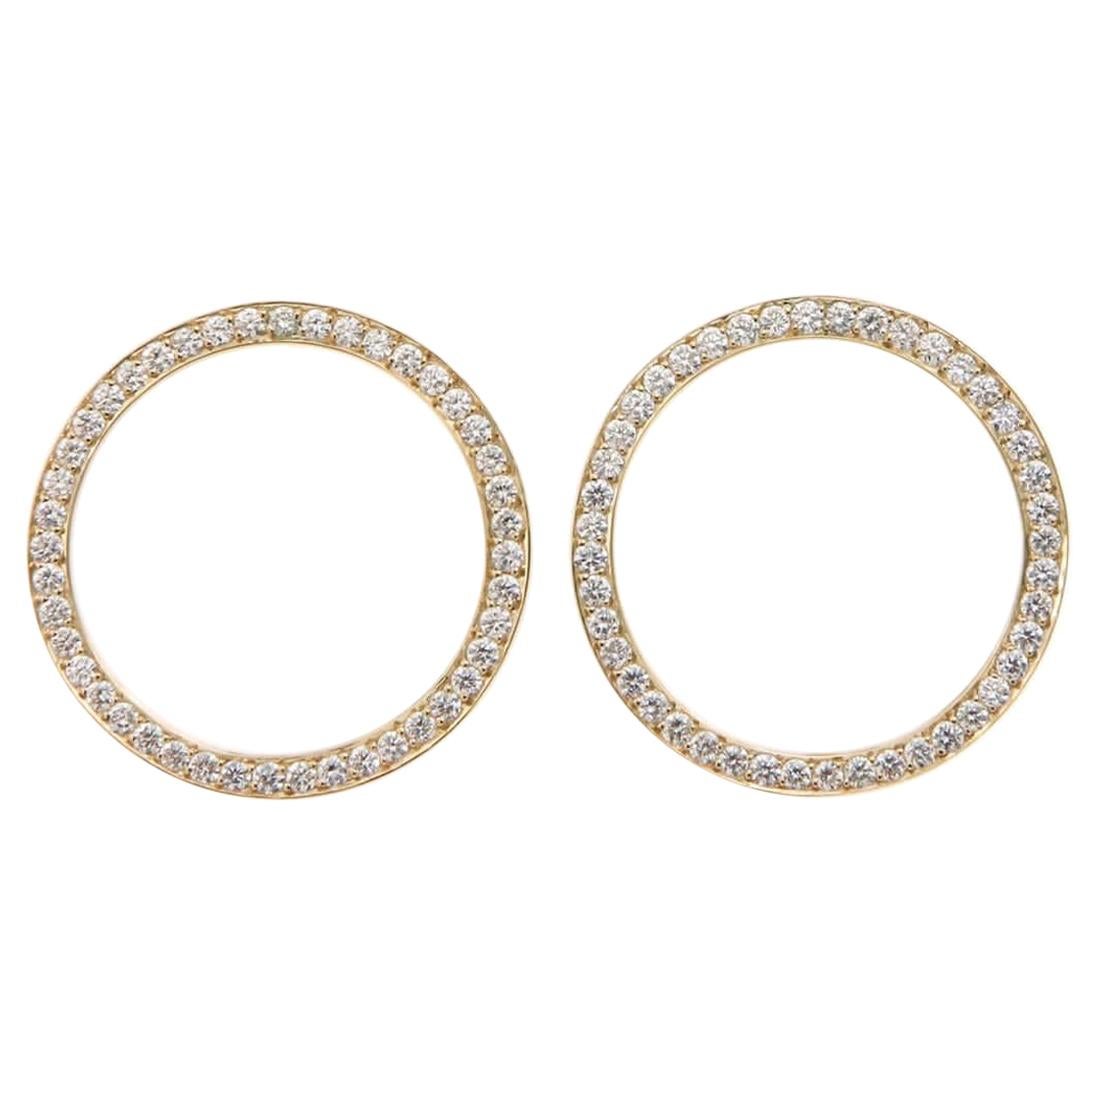 Pave'd Diamond Circle Earrings in 18 Karat Yellow Gold For Sale